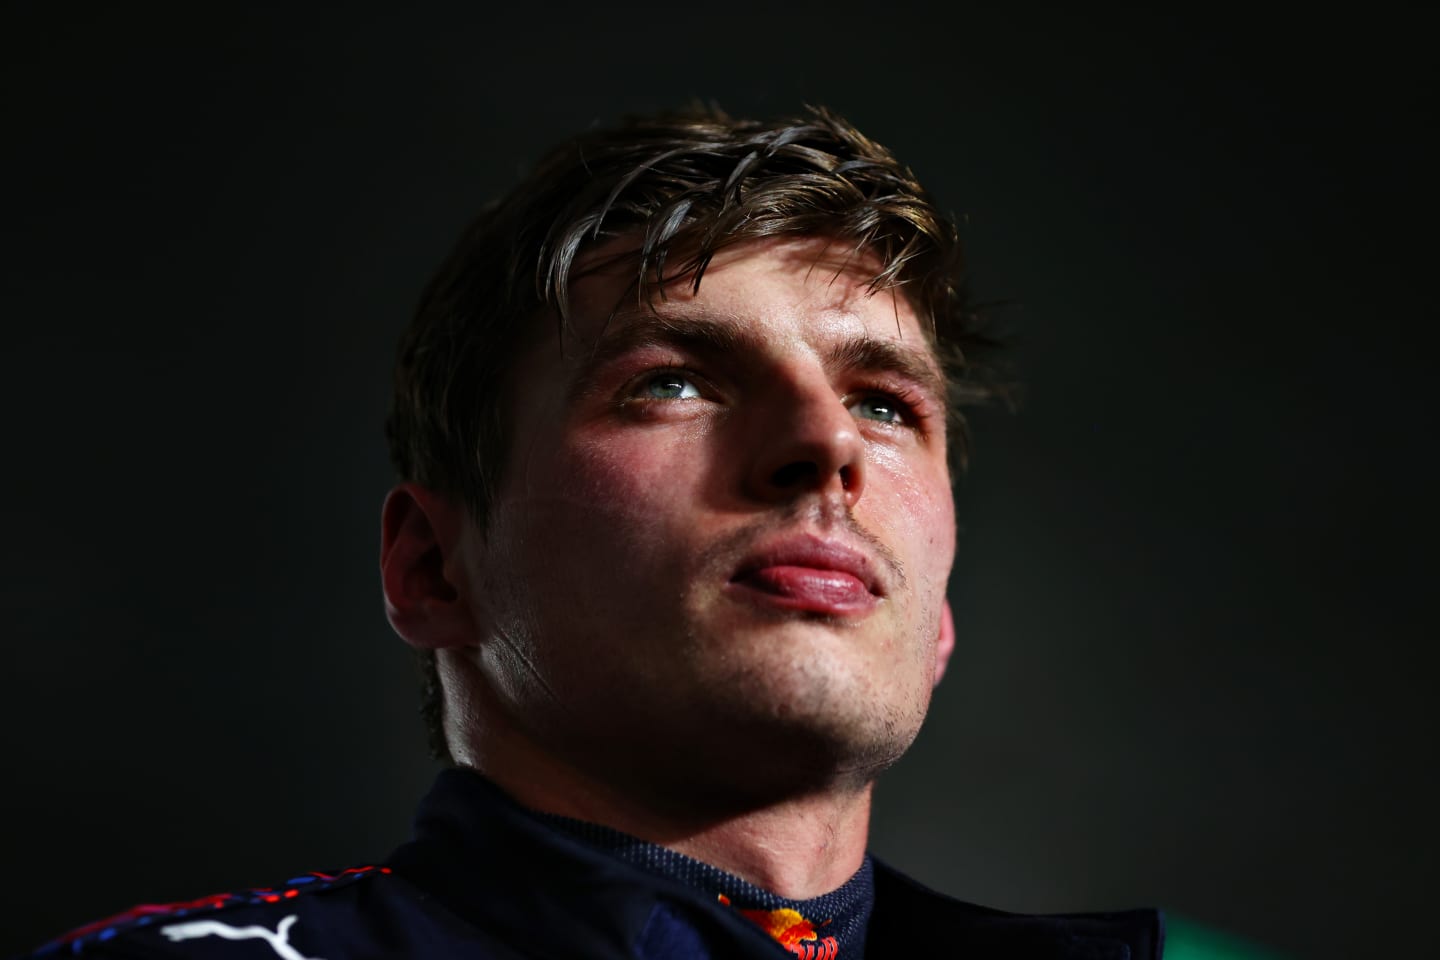 DOHA, QATAR - NOVEMBER 21: Second placed Max Verstappen of Netherlands and Red Bull Racing looks on